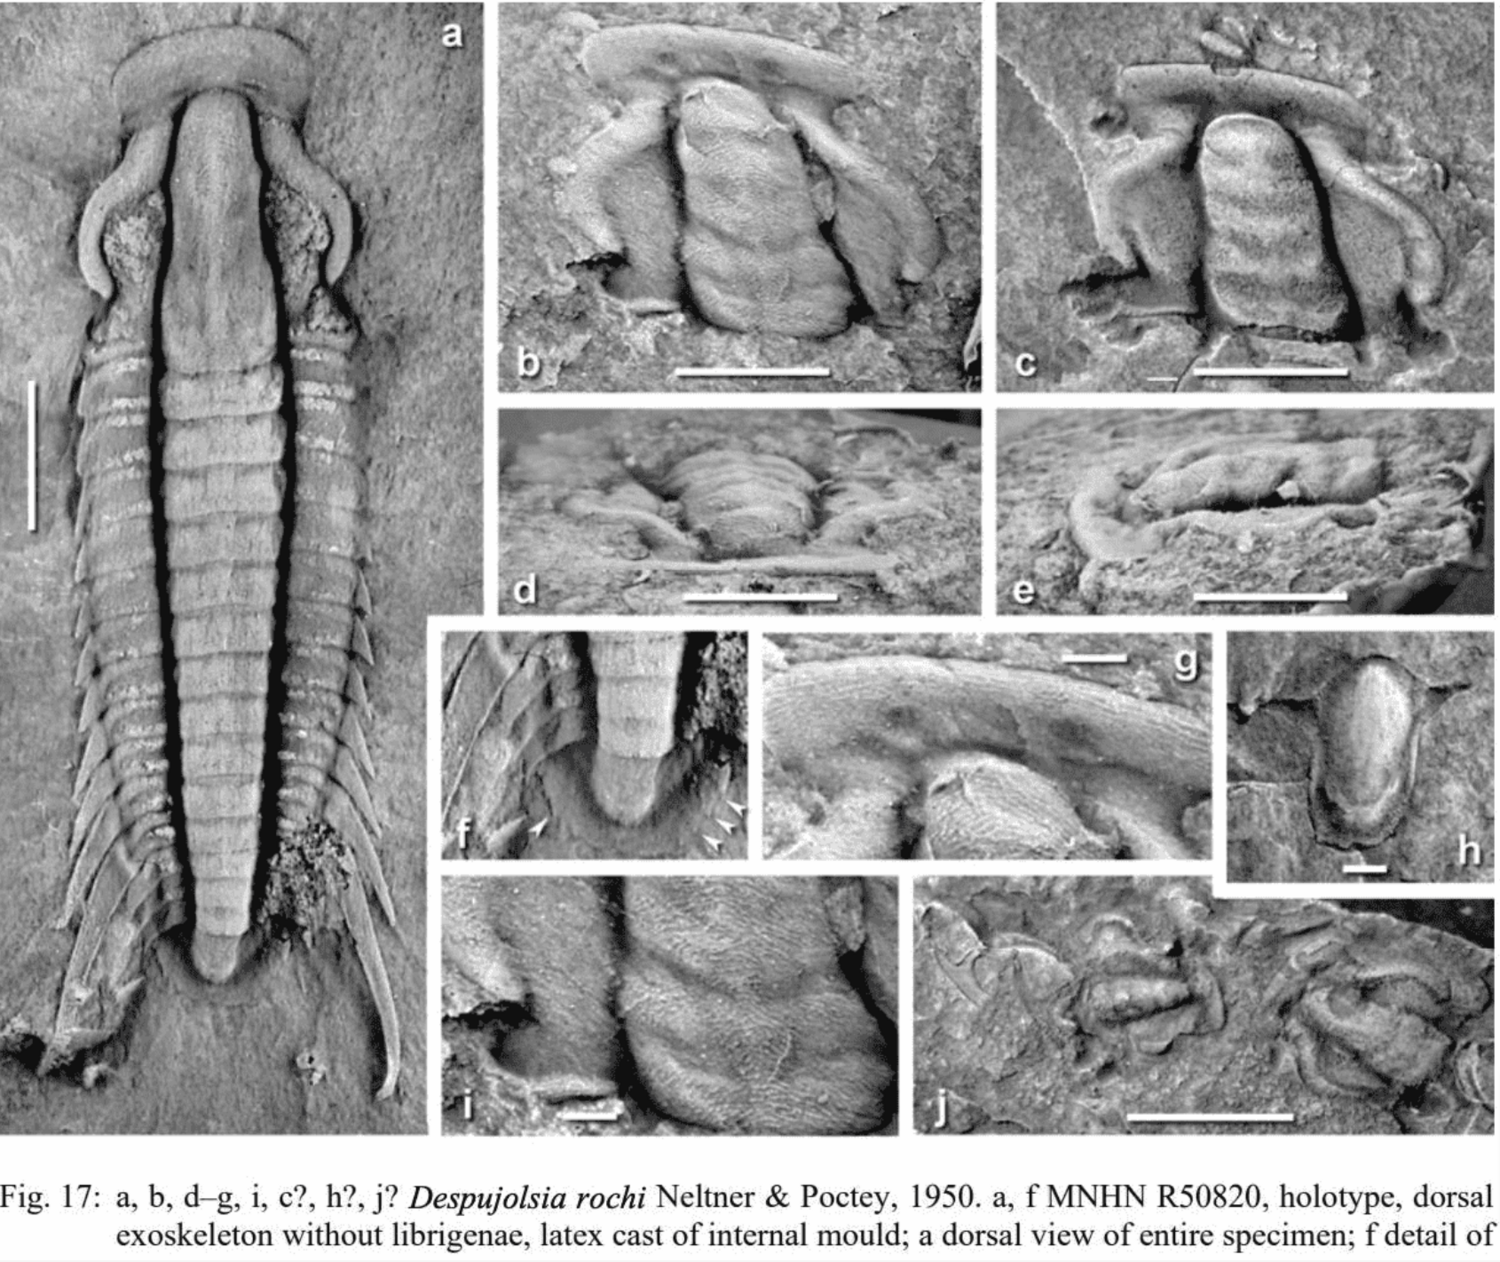 A critical evaluation of the Resserops clade (Trilobita: Despujolsiidae, early Cambrian) with remarks on related redlichiacean families (Geyer, 2020).